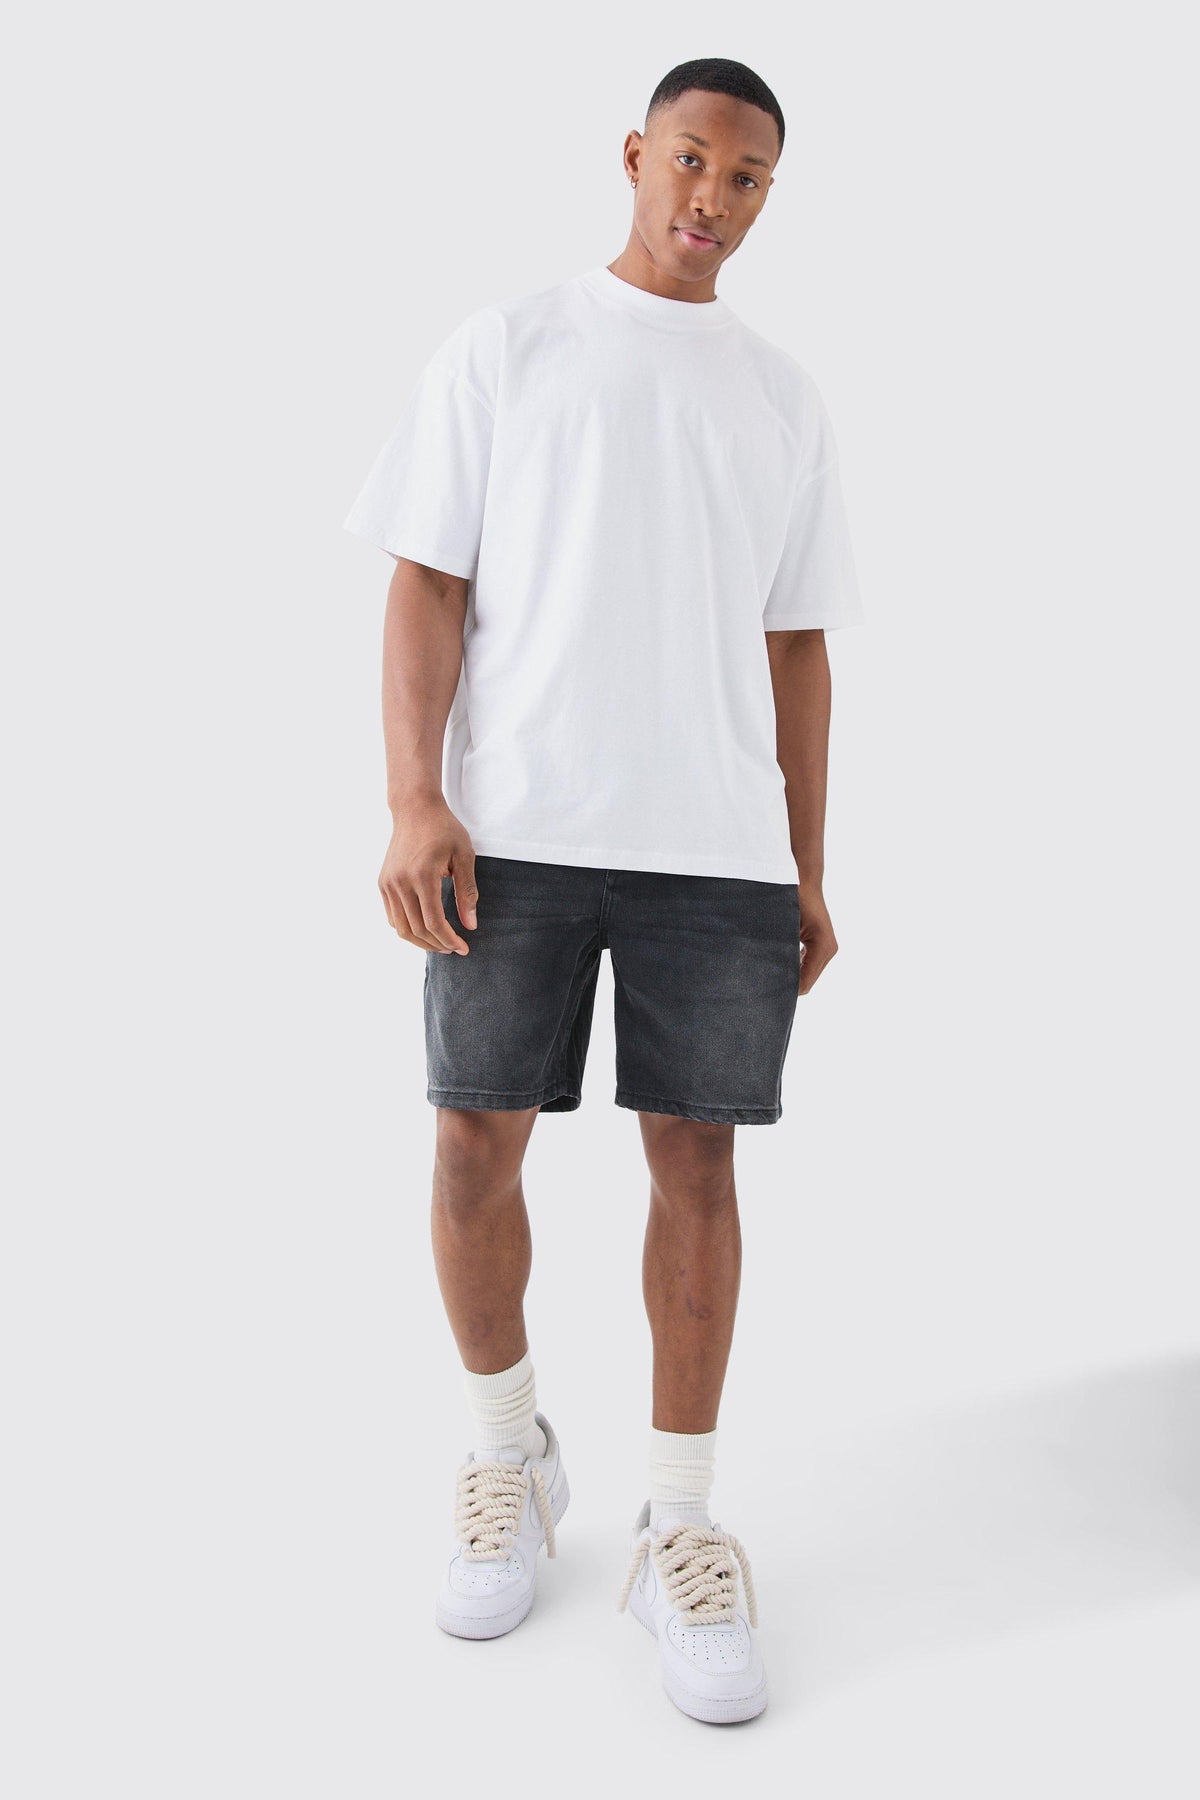 Relaxed Rigid Denim Shorts In Charcoal